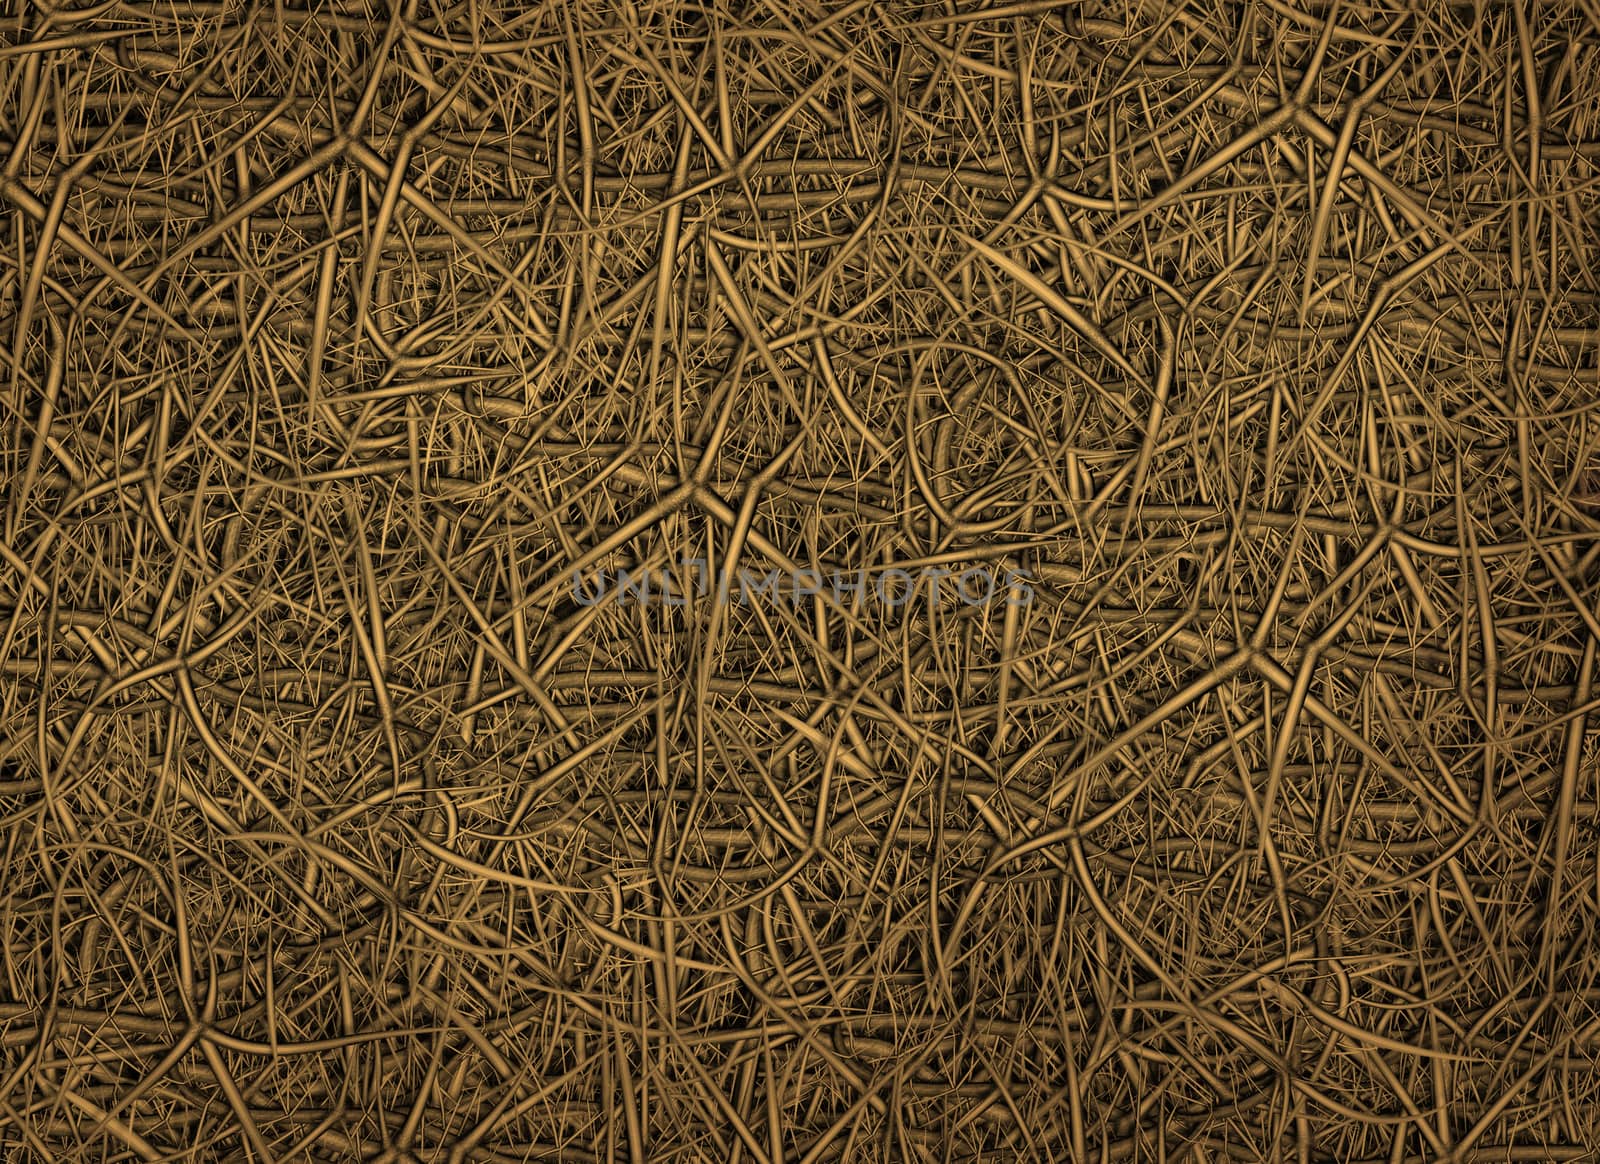 Illustration of hundreds of thorns to use as a background.